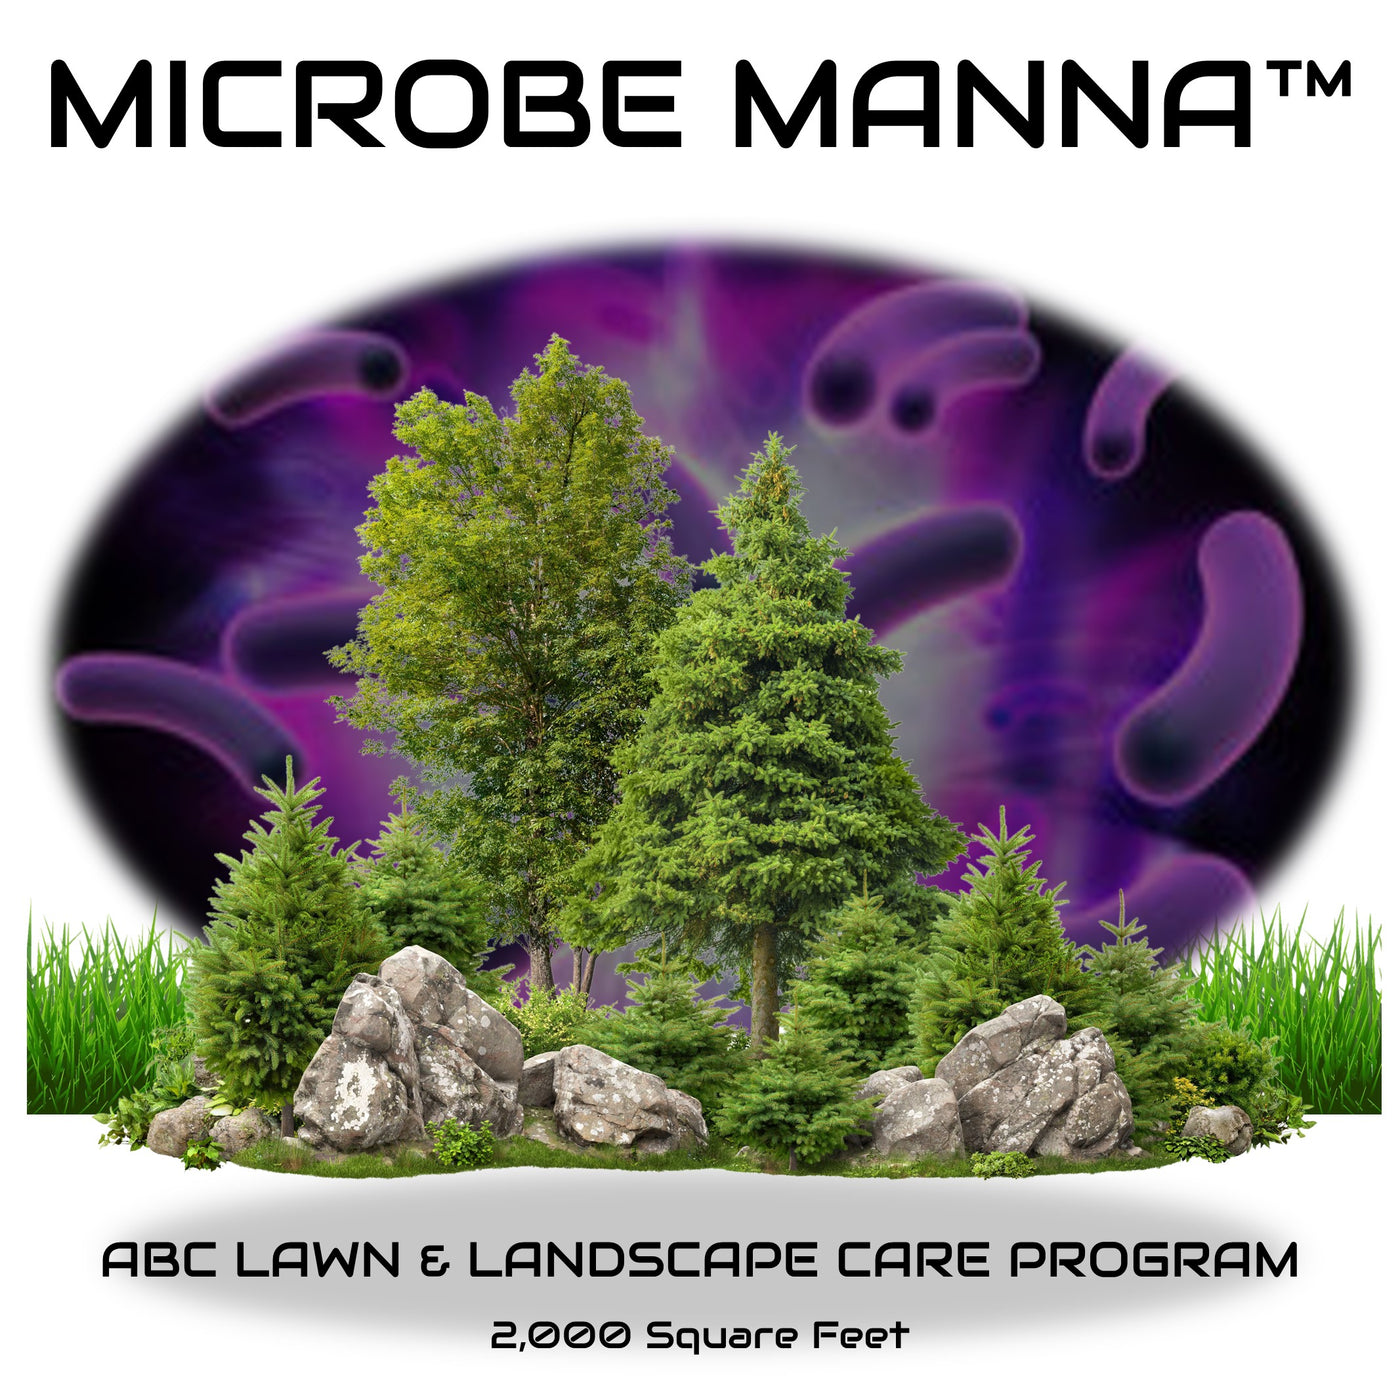 Microbe Manna ABC Lawn and Landscape Care Program for 2000 Square Feet